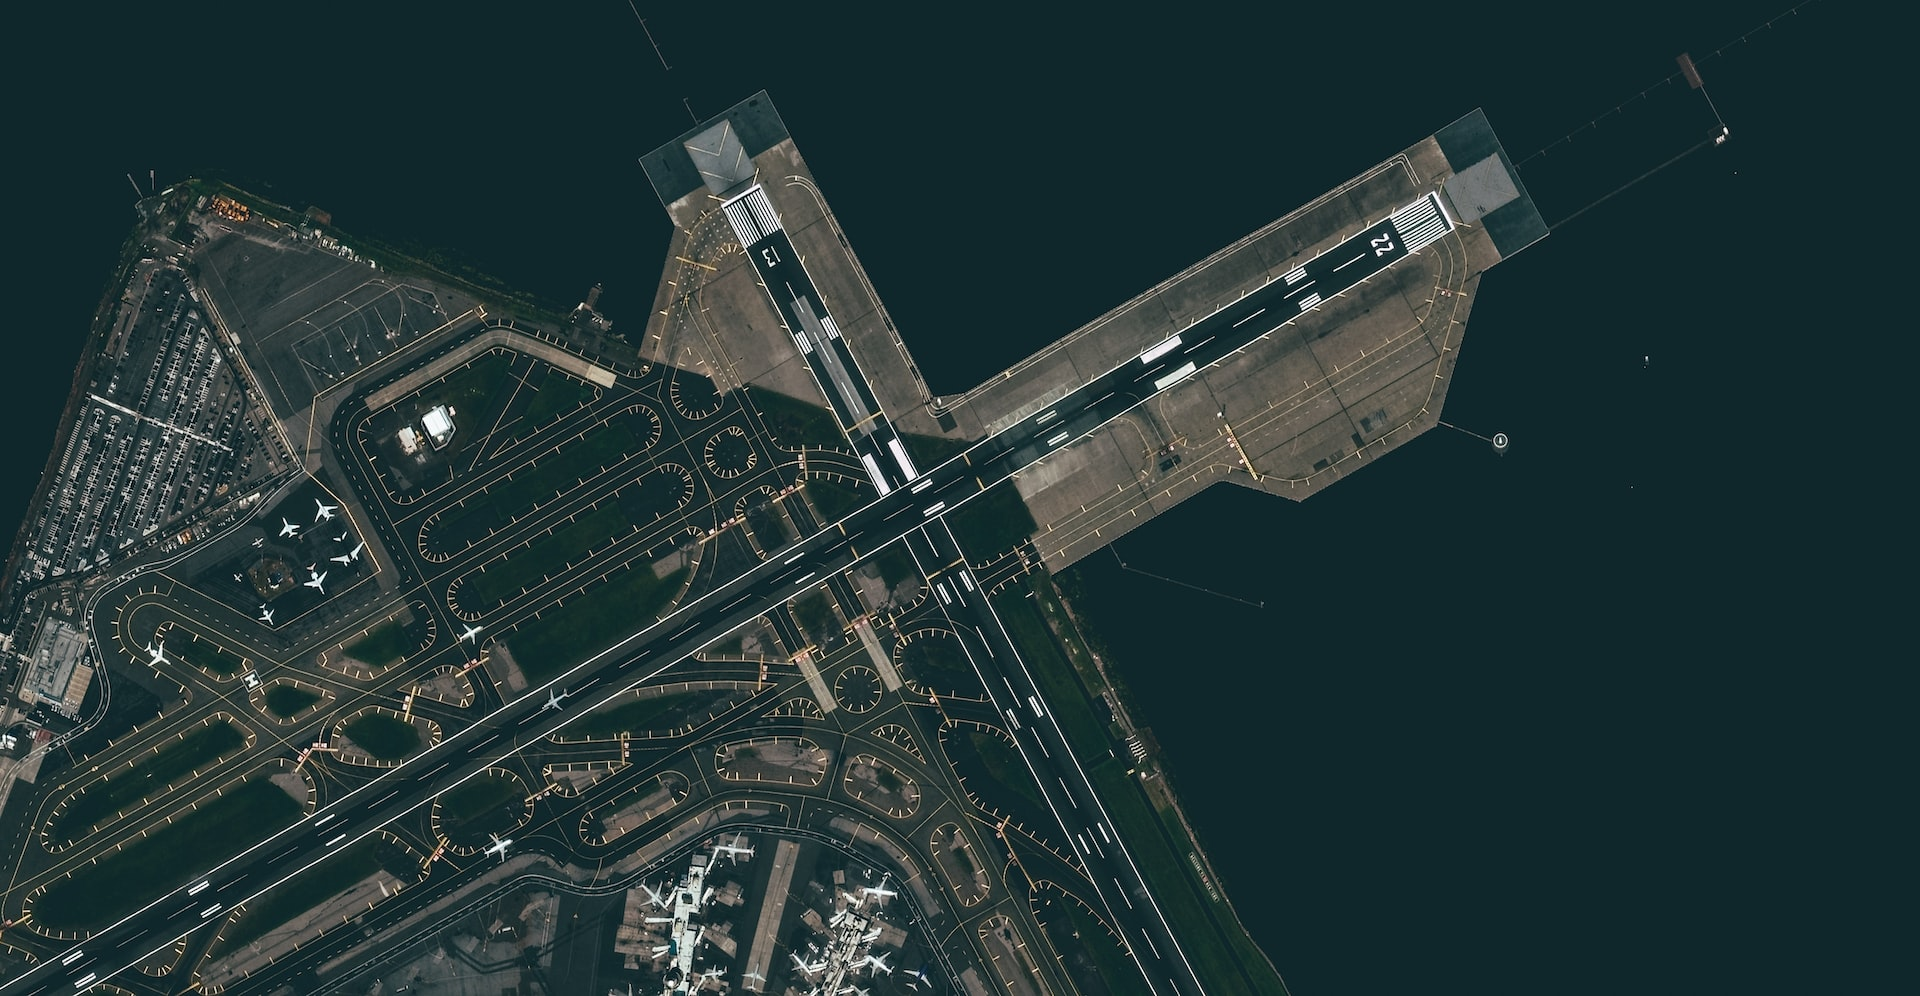 Two runways of an airport intersecting.